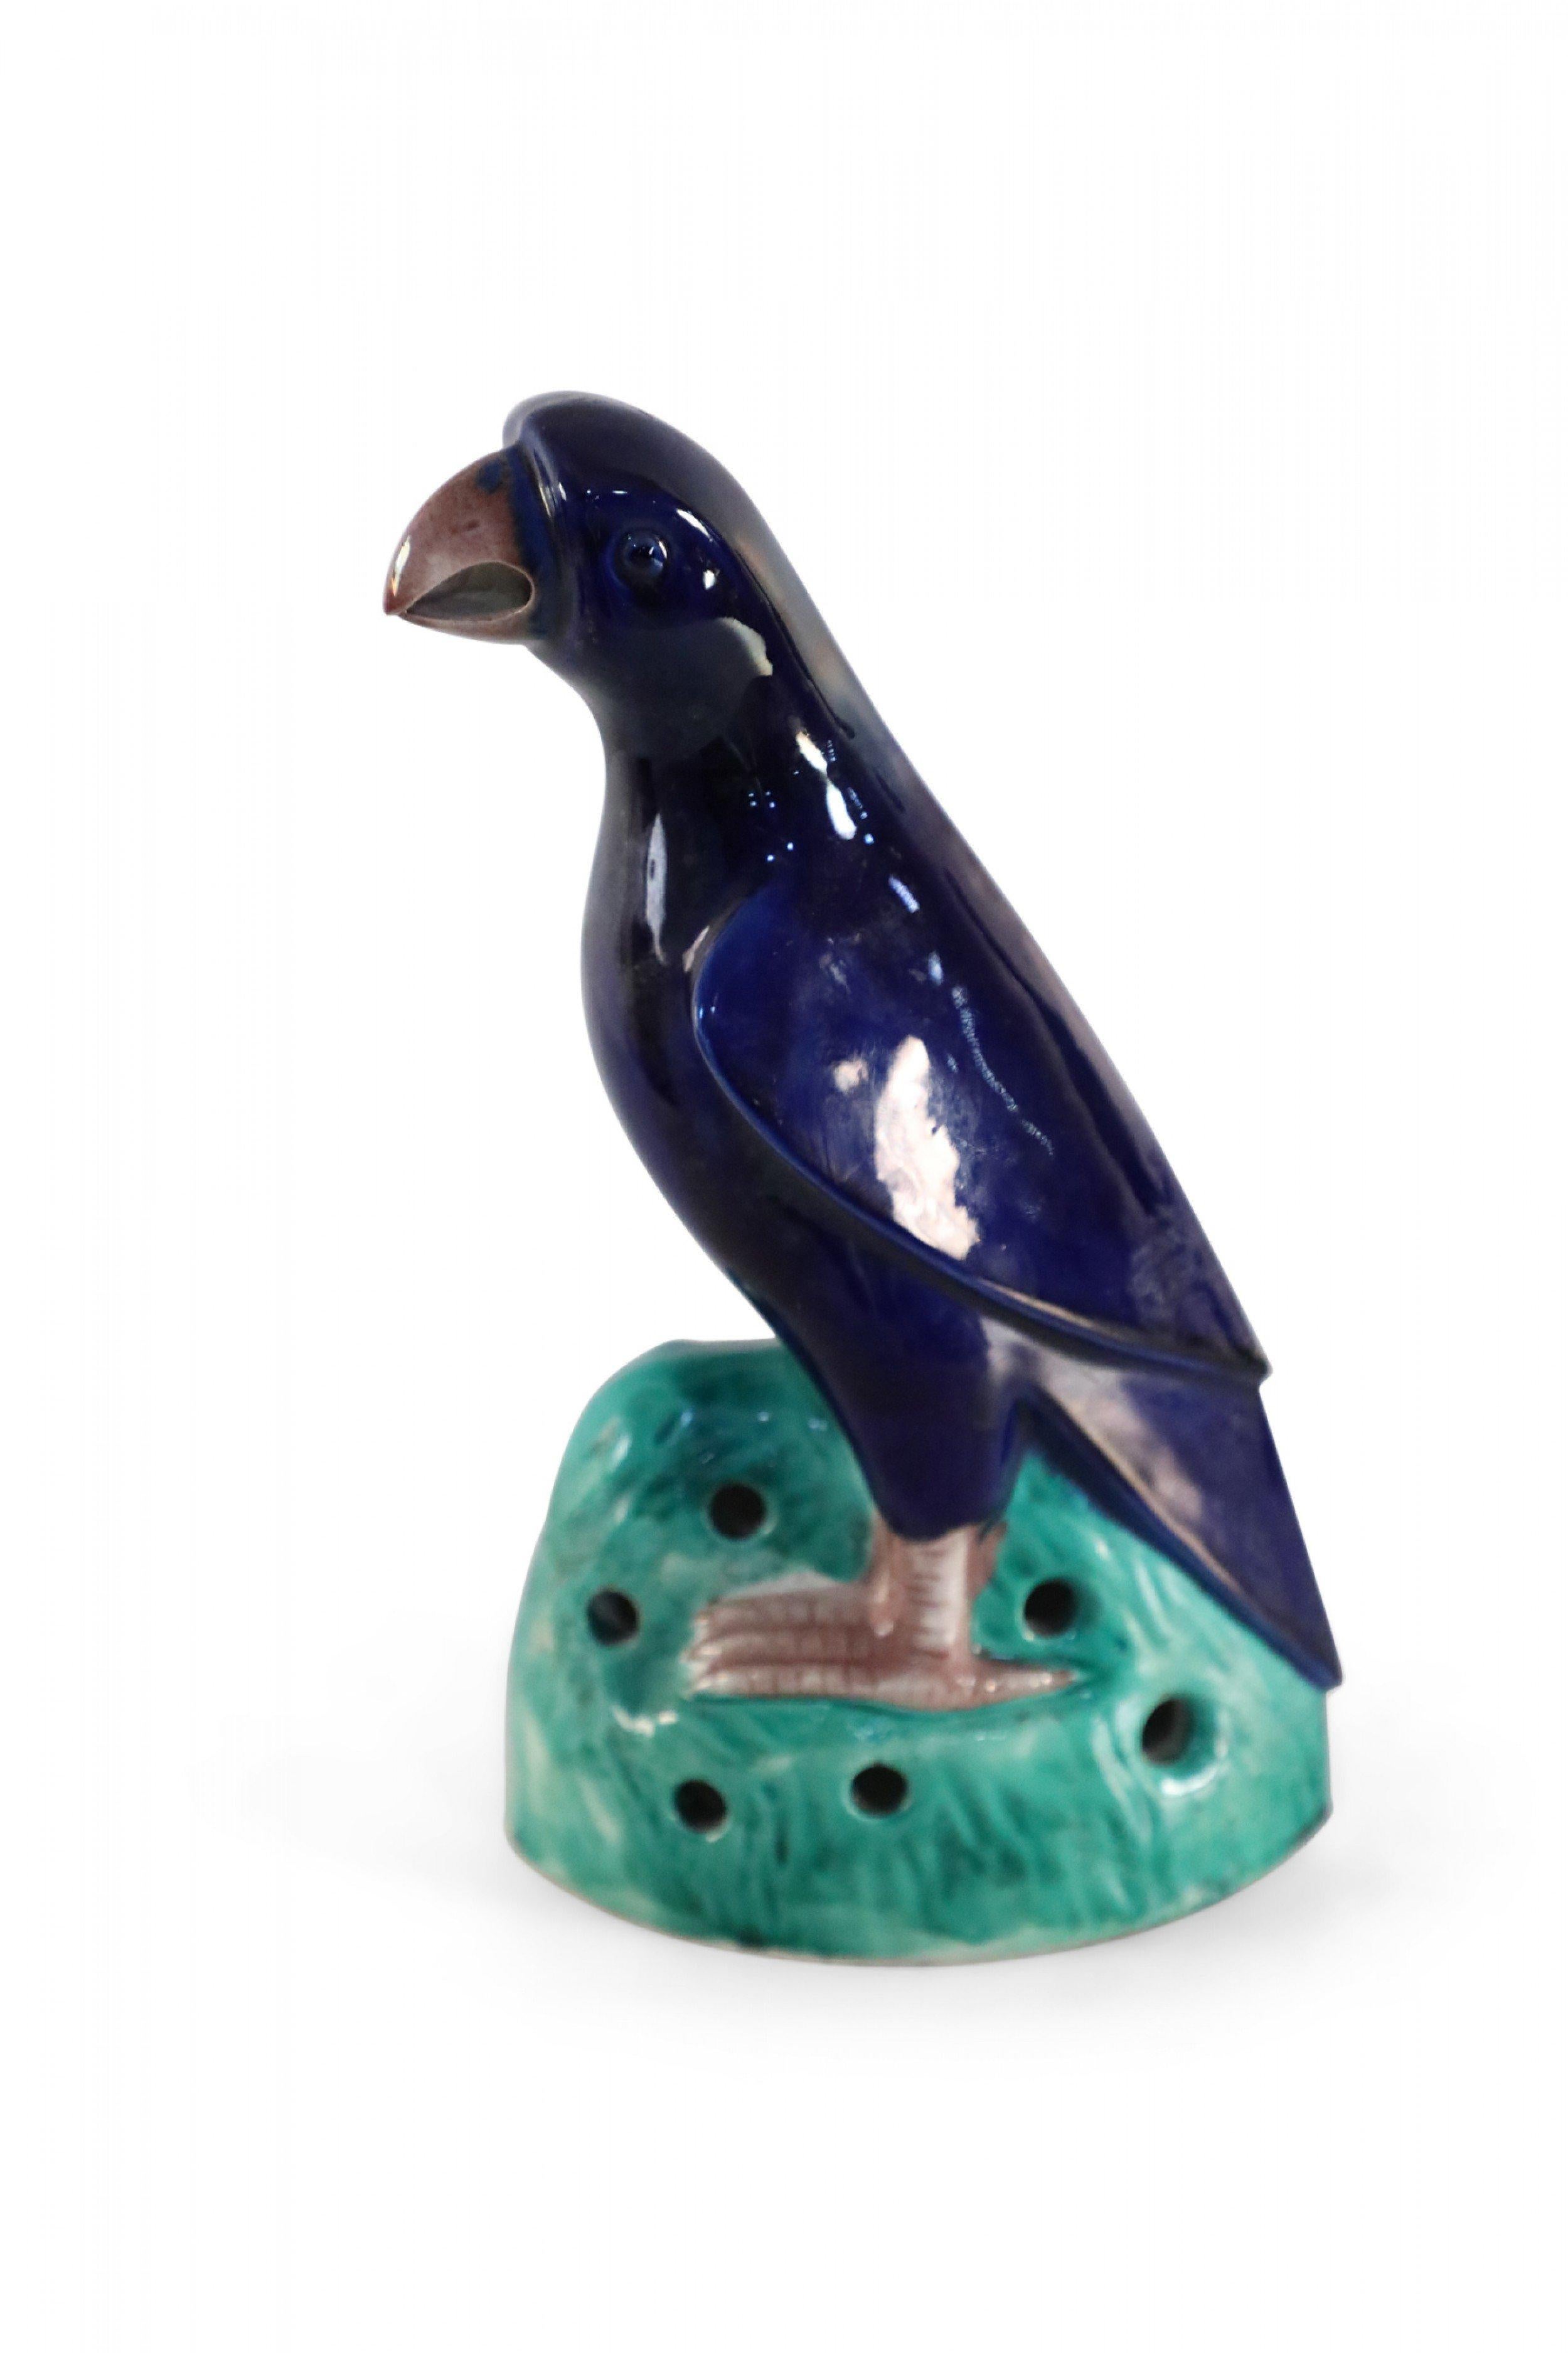 Vintage Chinese glazed porcelain statue of a navy blue parrot with a brown beak and talons perched atop green grasses. 
      